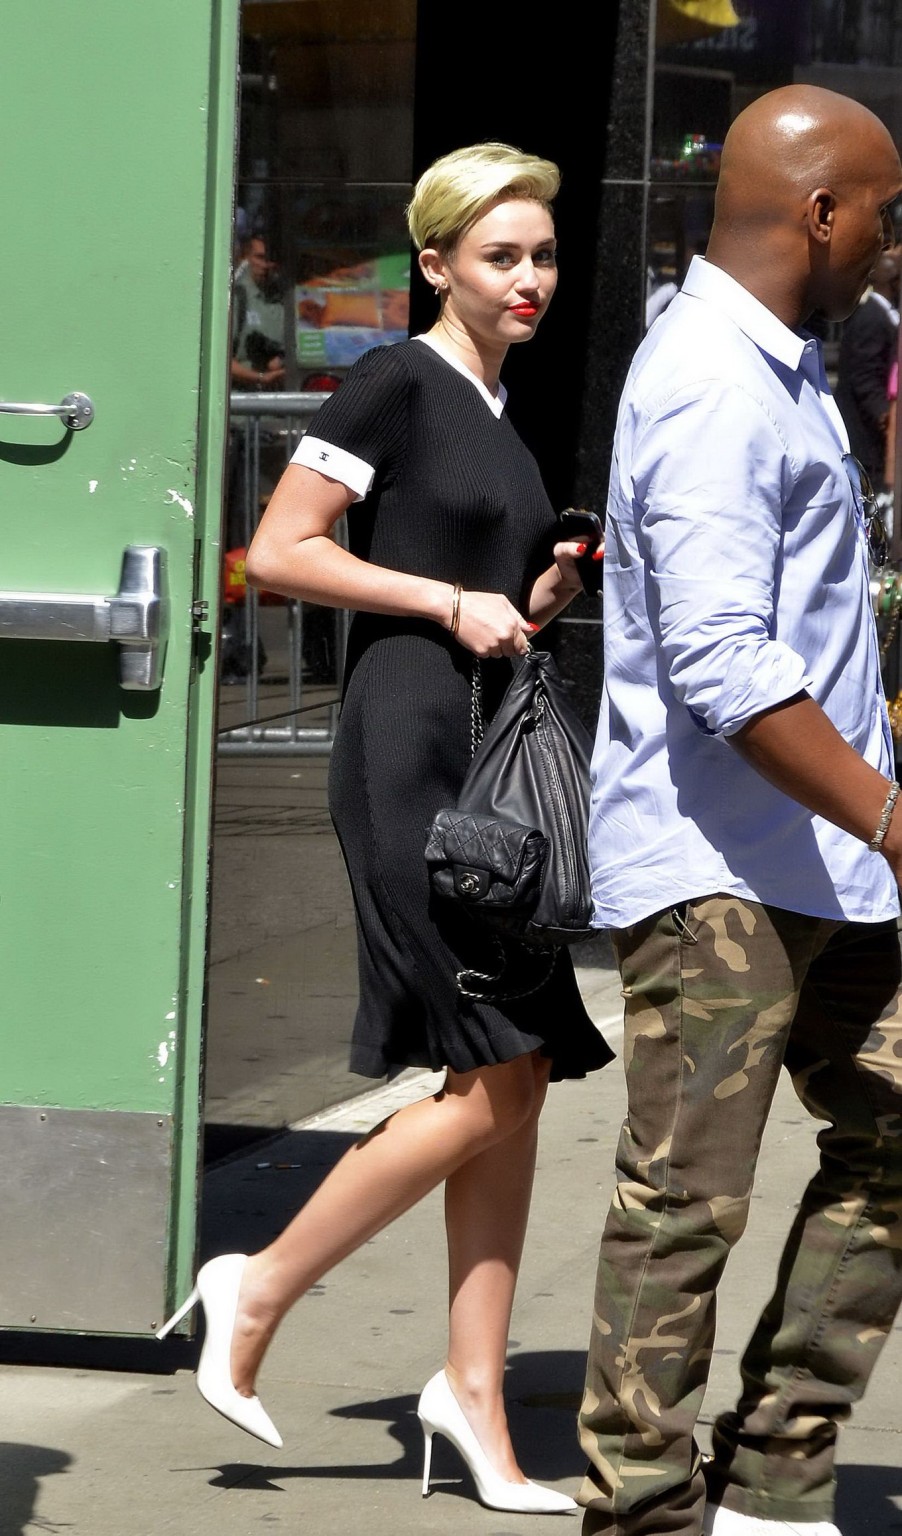 Miley Cyrus flashing her boobs braless in black transparent dress out in NYC #75224541